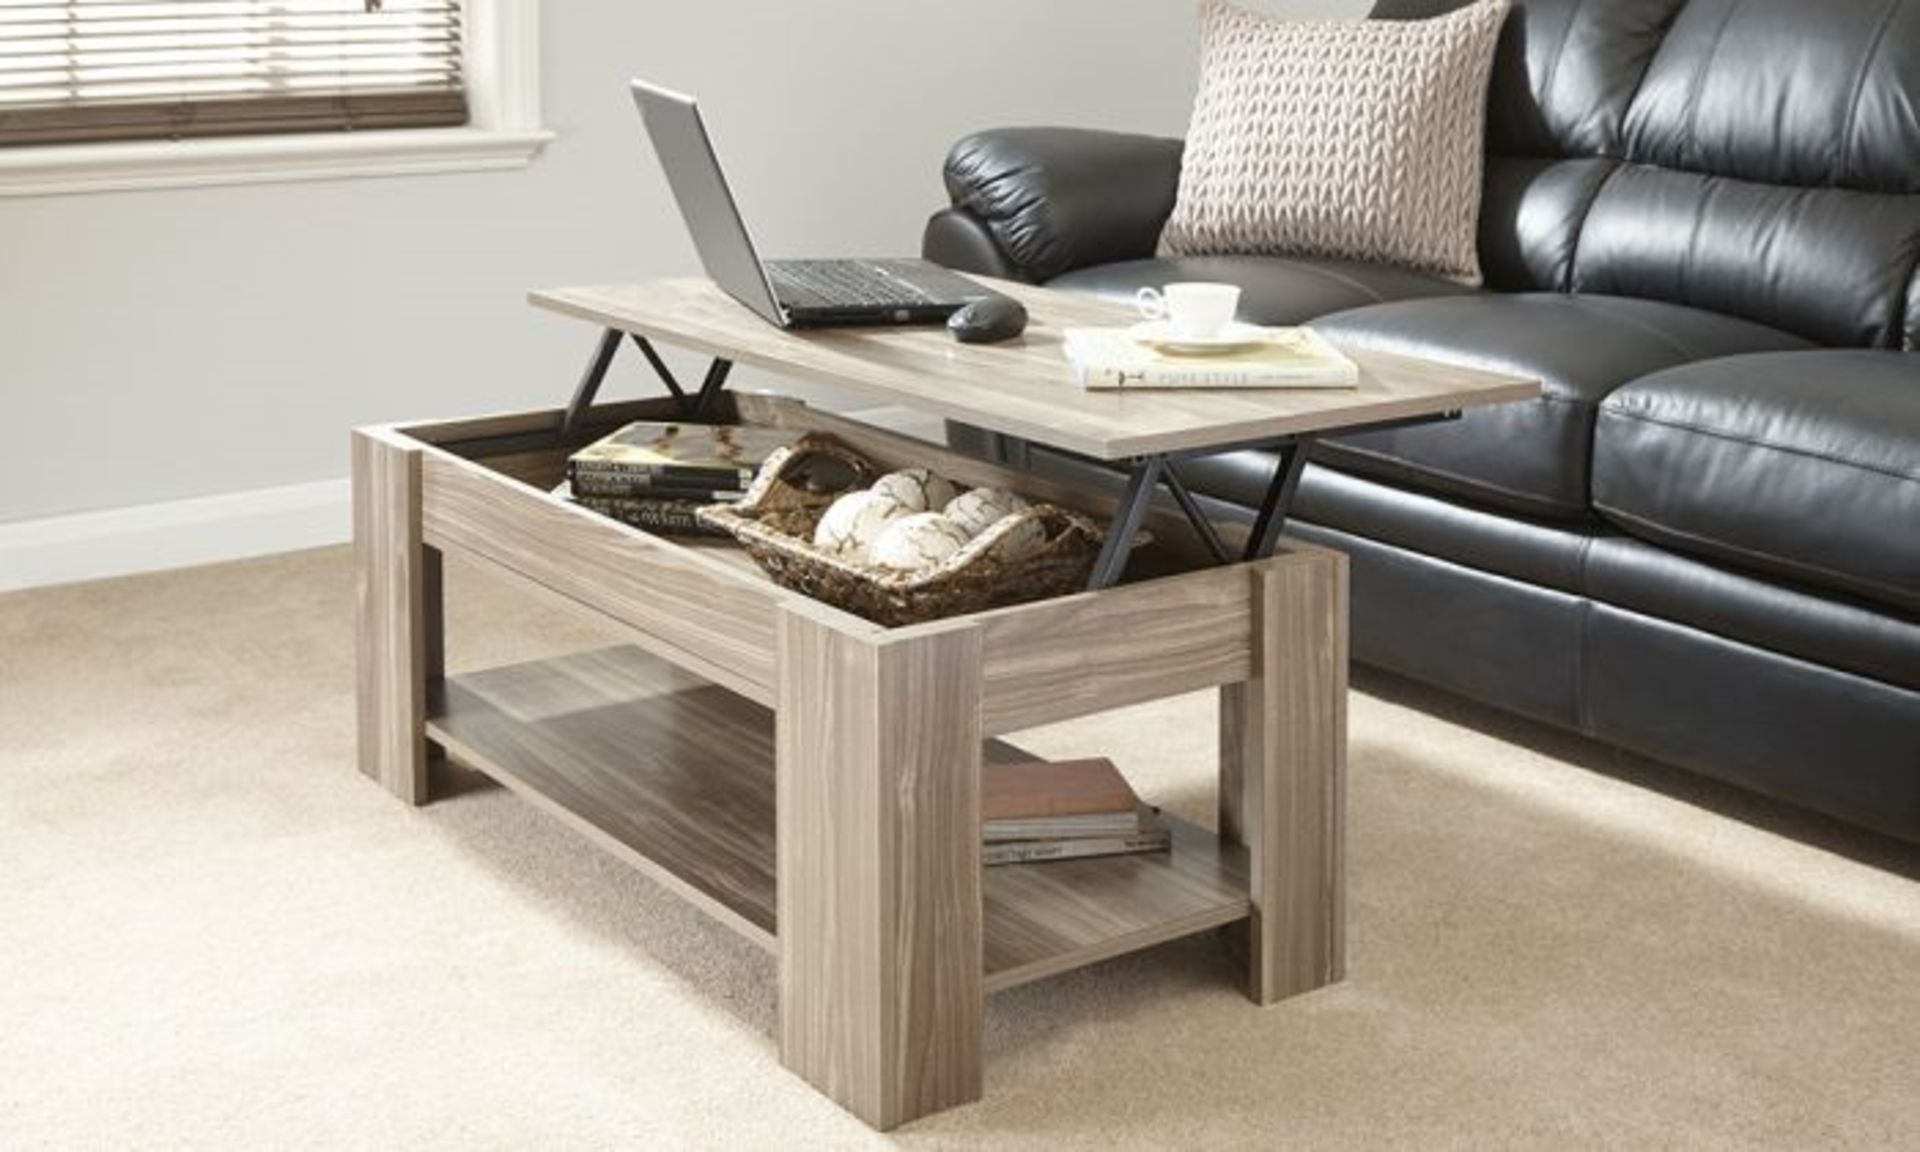 1 LOT TO CONTAIN KIMBERLY LIFT UP COFFEE TABLE IN WALNUT - IN 1 BOX